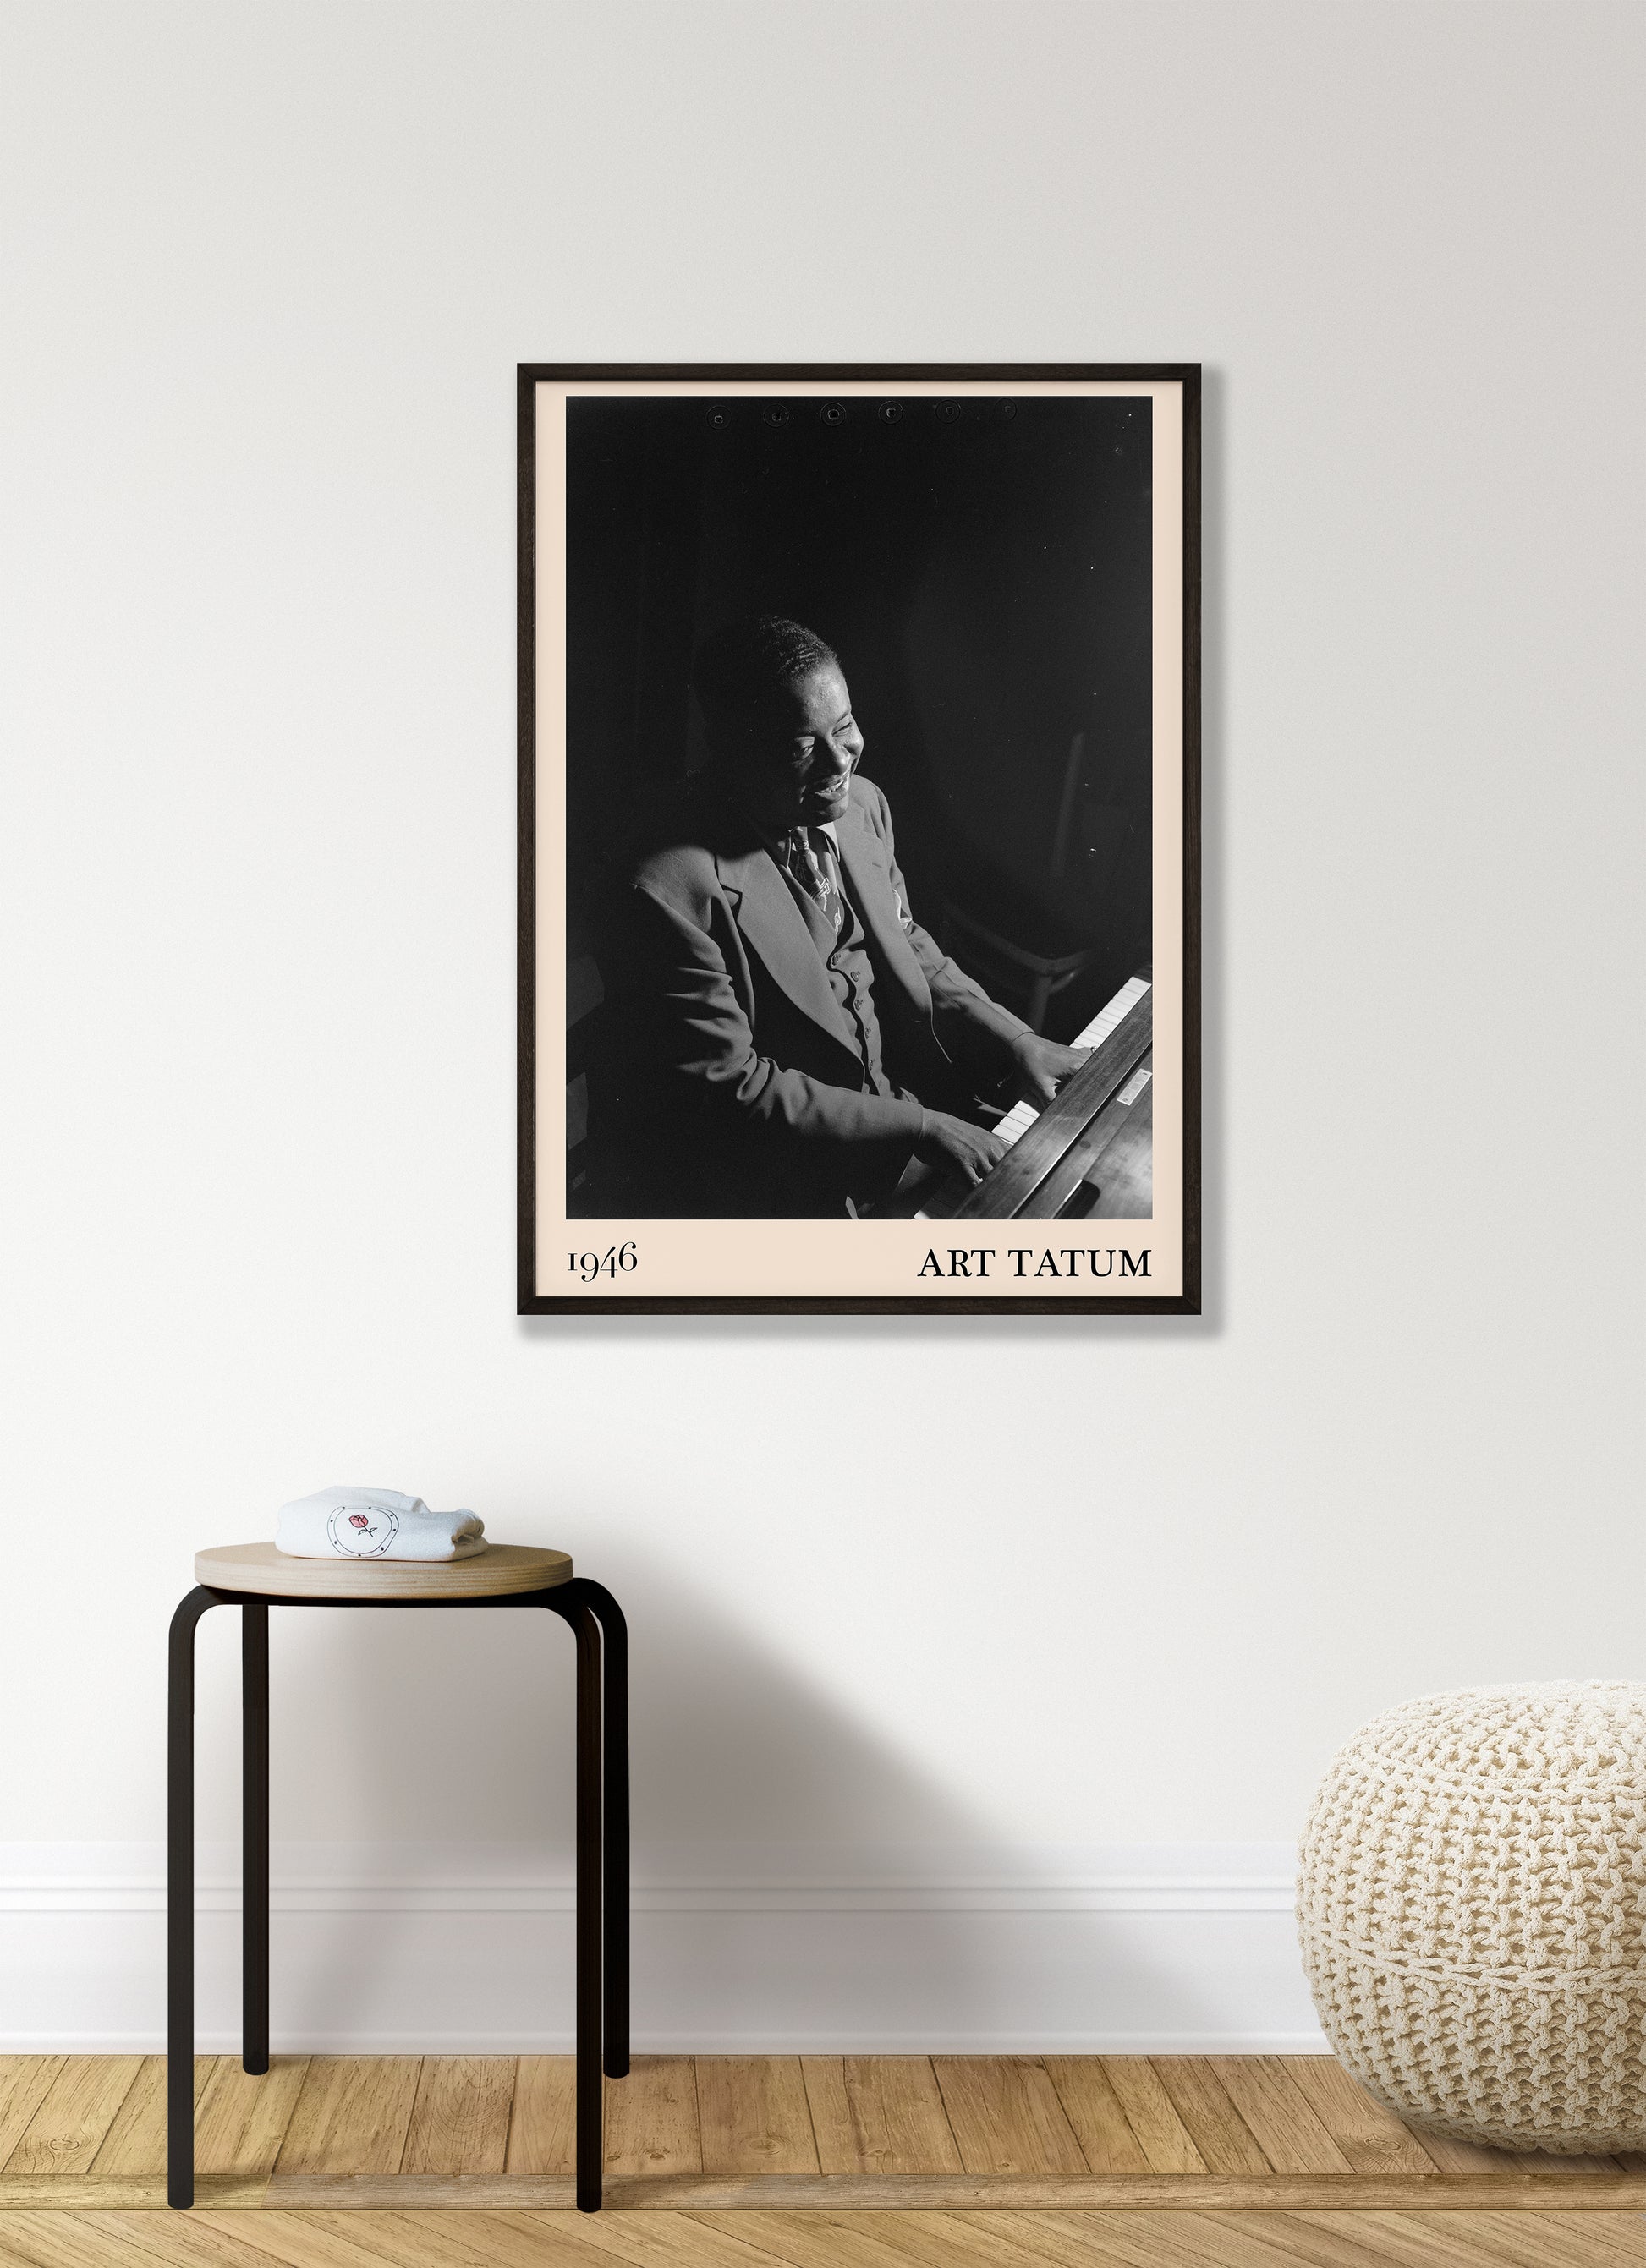 1946 photograph of Art Tatum crafted into a cool framed music print. The poster has an off-white border and a thin black frame. The poster is hanging on a white bedroom wall